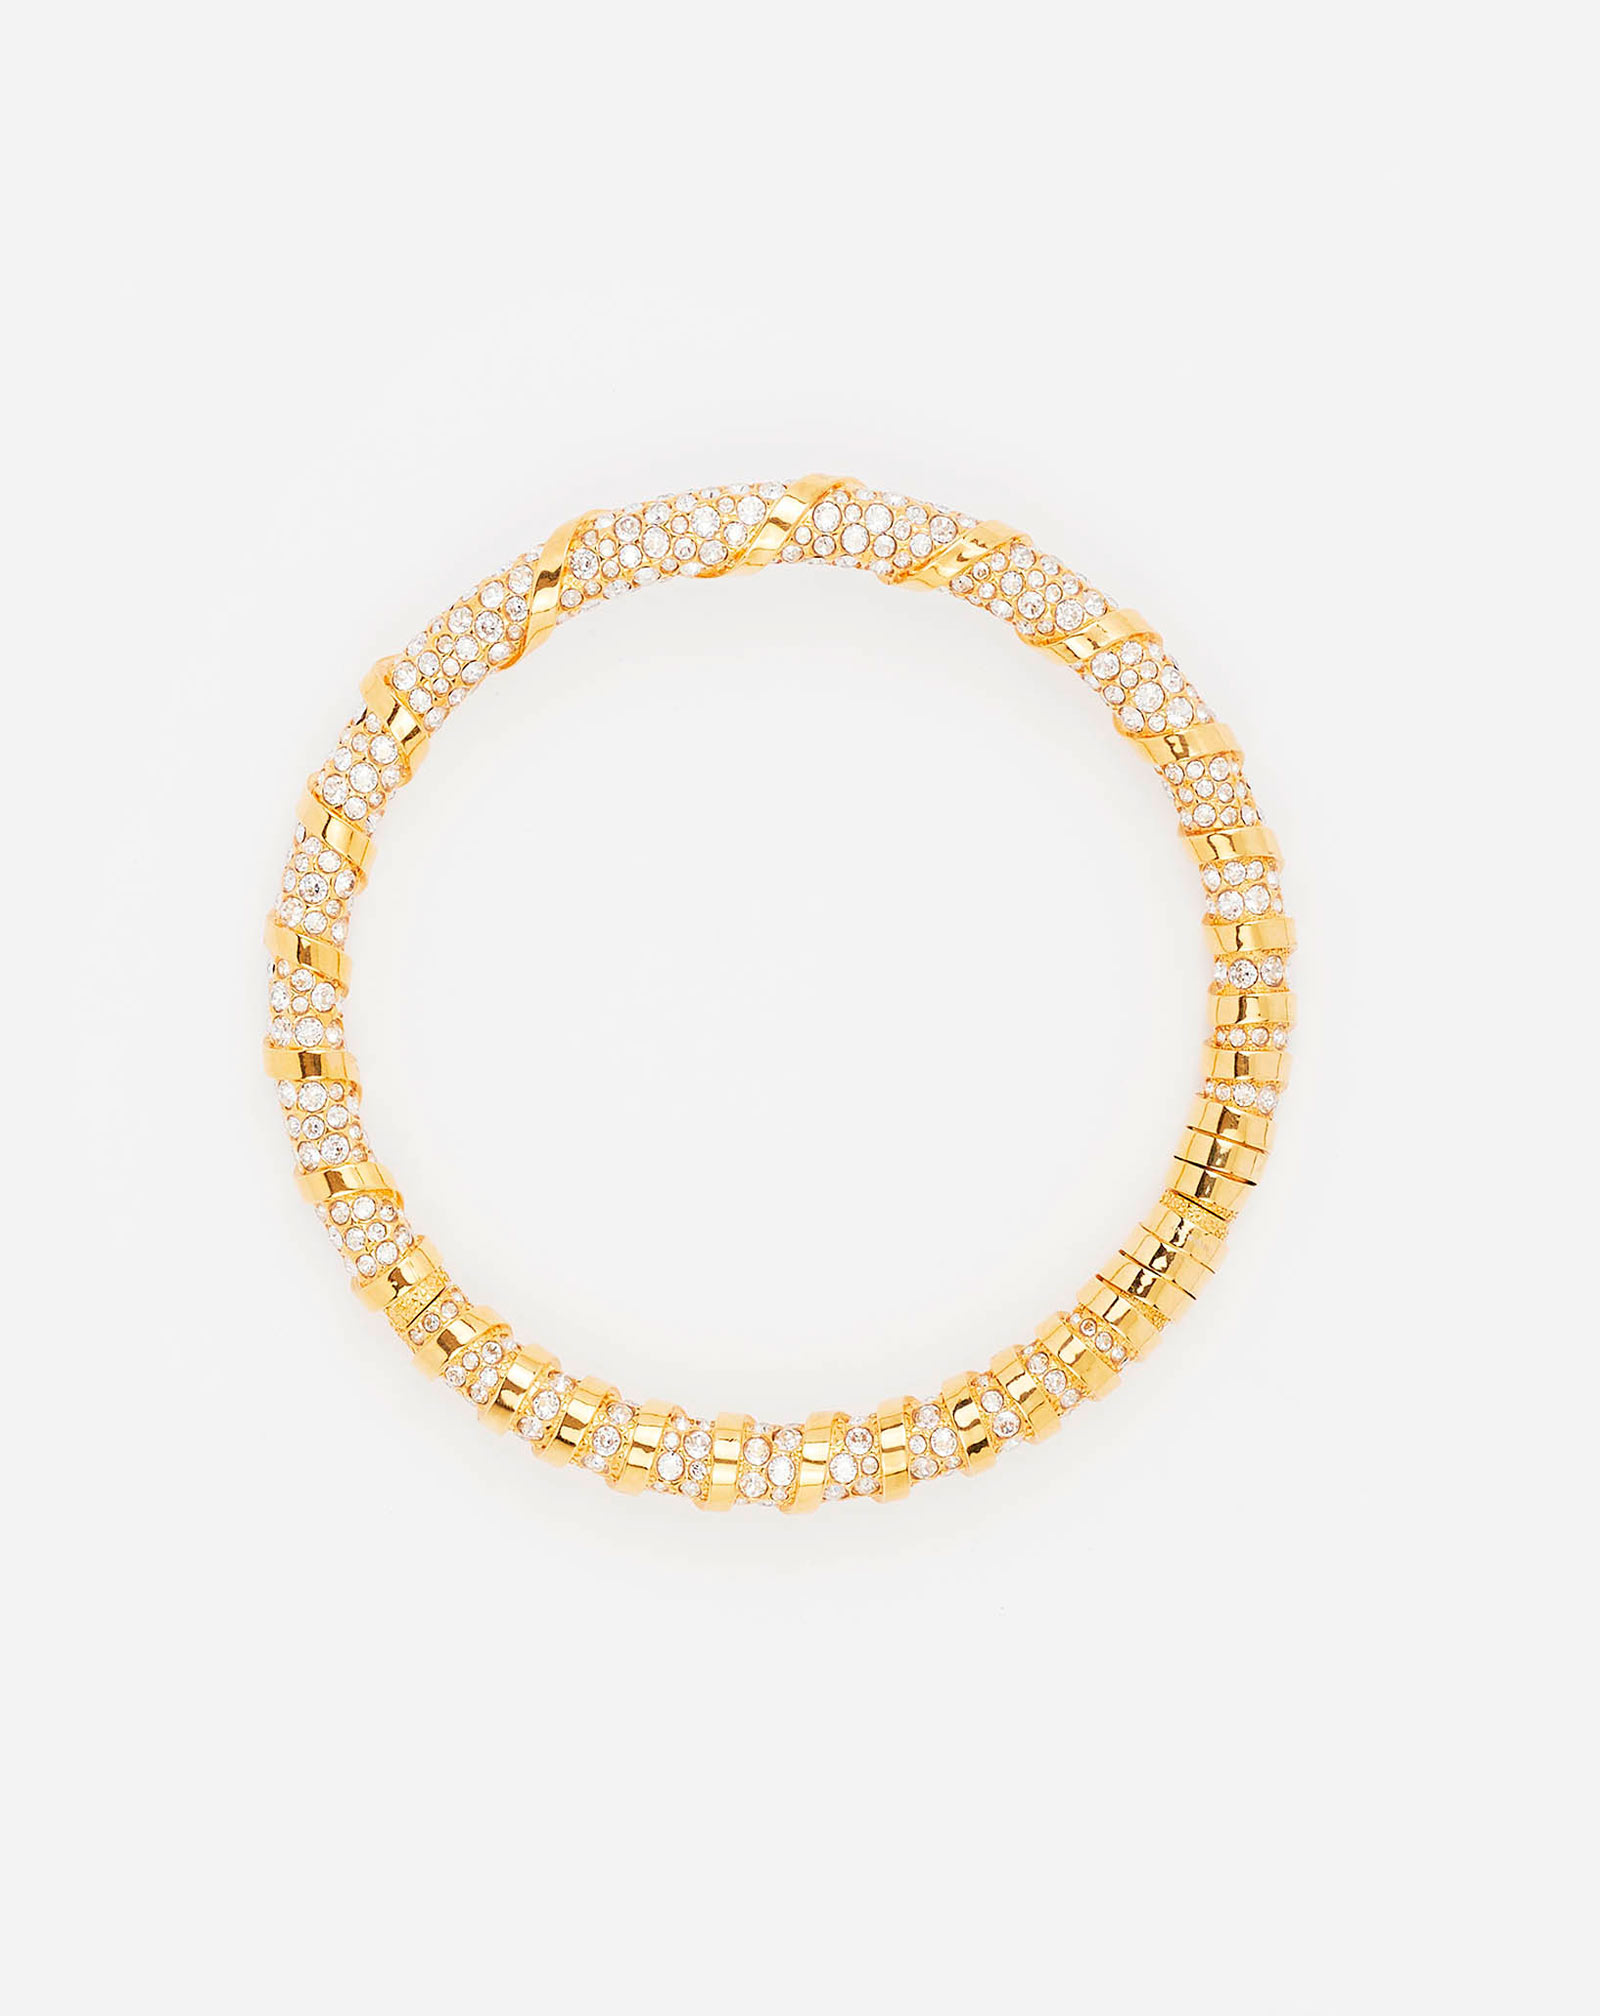 Lanvin Rhinestone Melodie Choker Necklace For Women In Gold